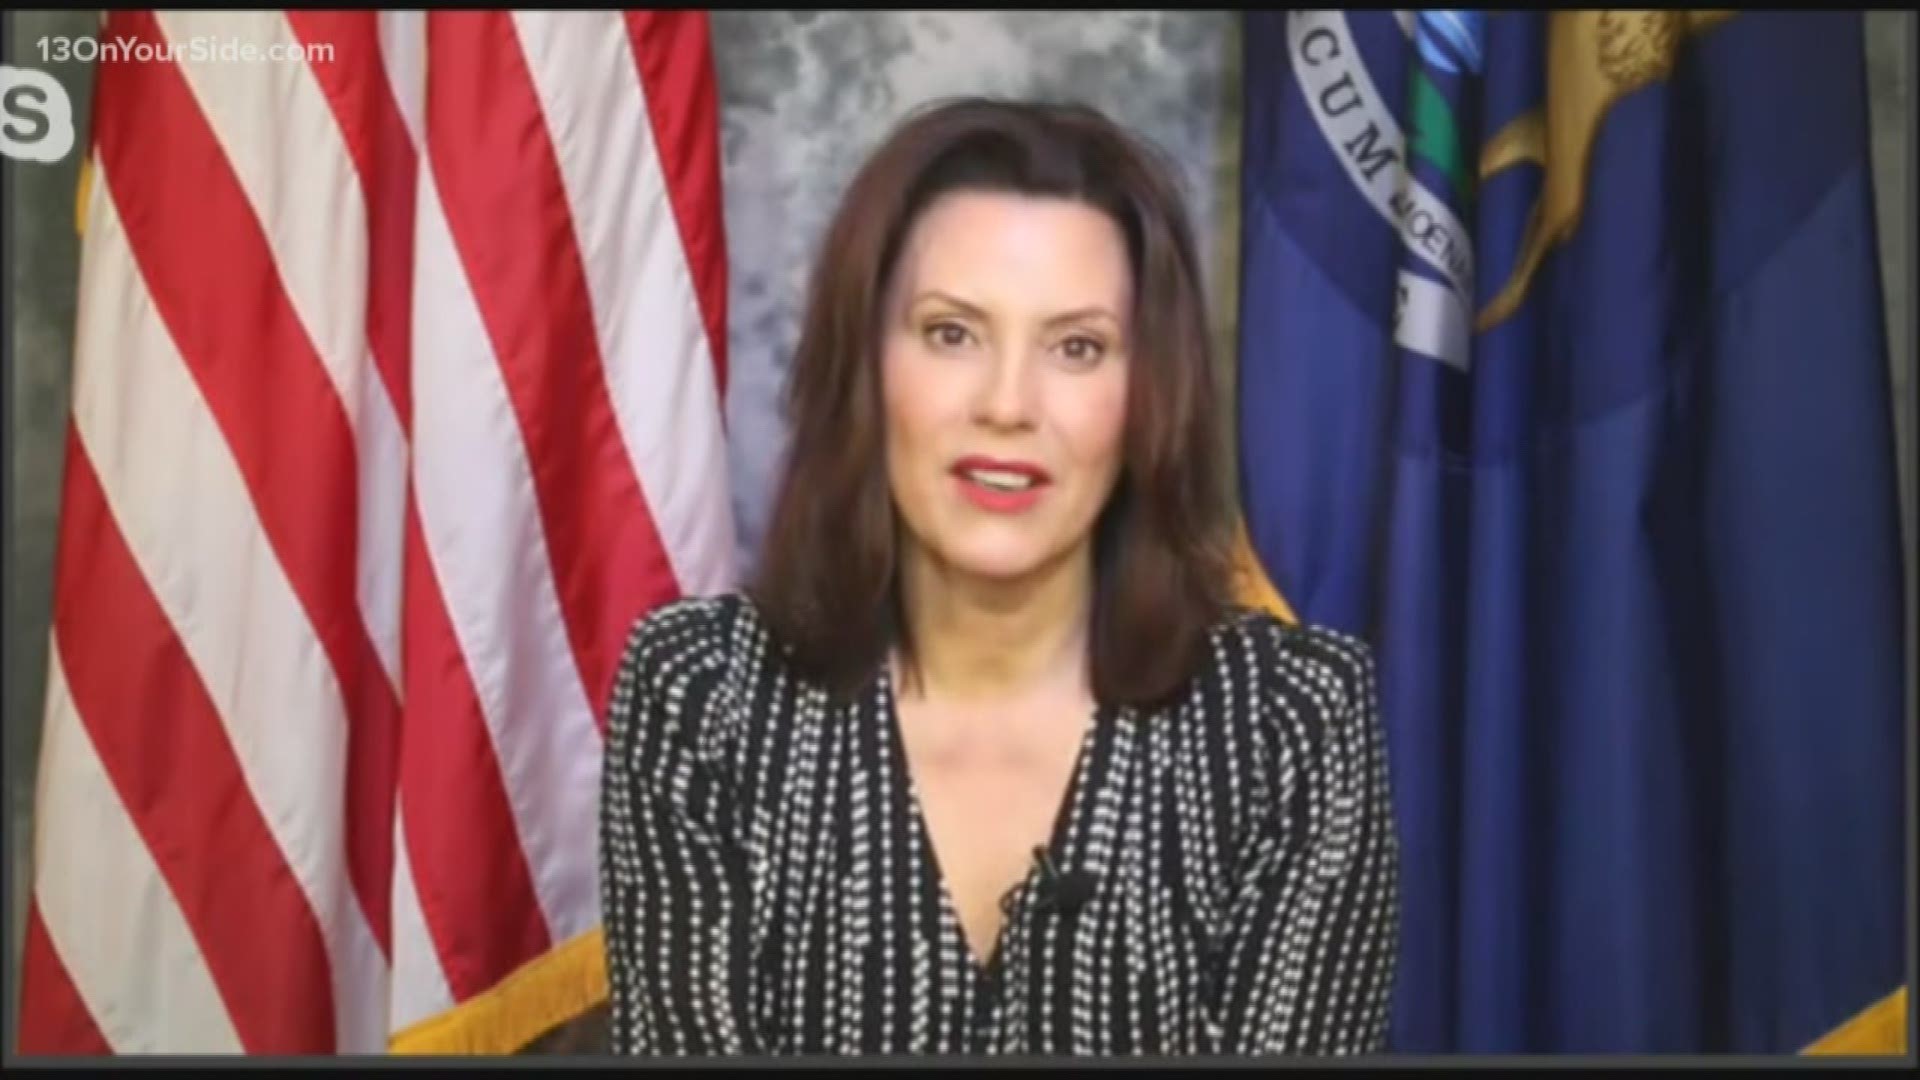 Governor Whitmer said she cannot make a prediction on when schools will open during this time.